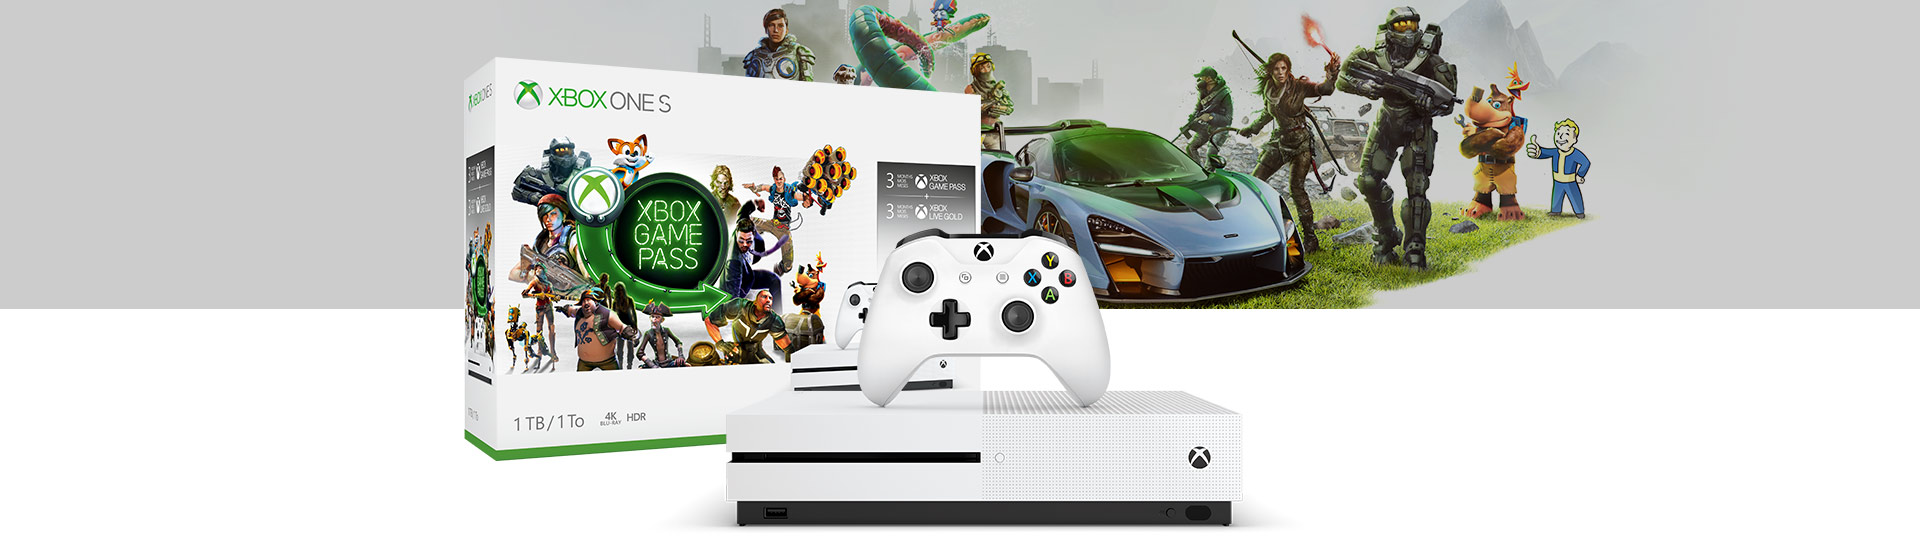 xbox live gold and game pass bundle